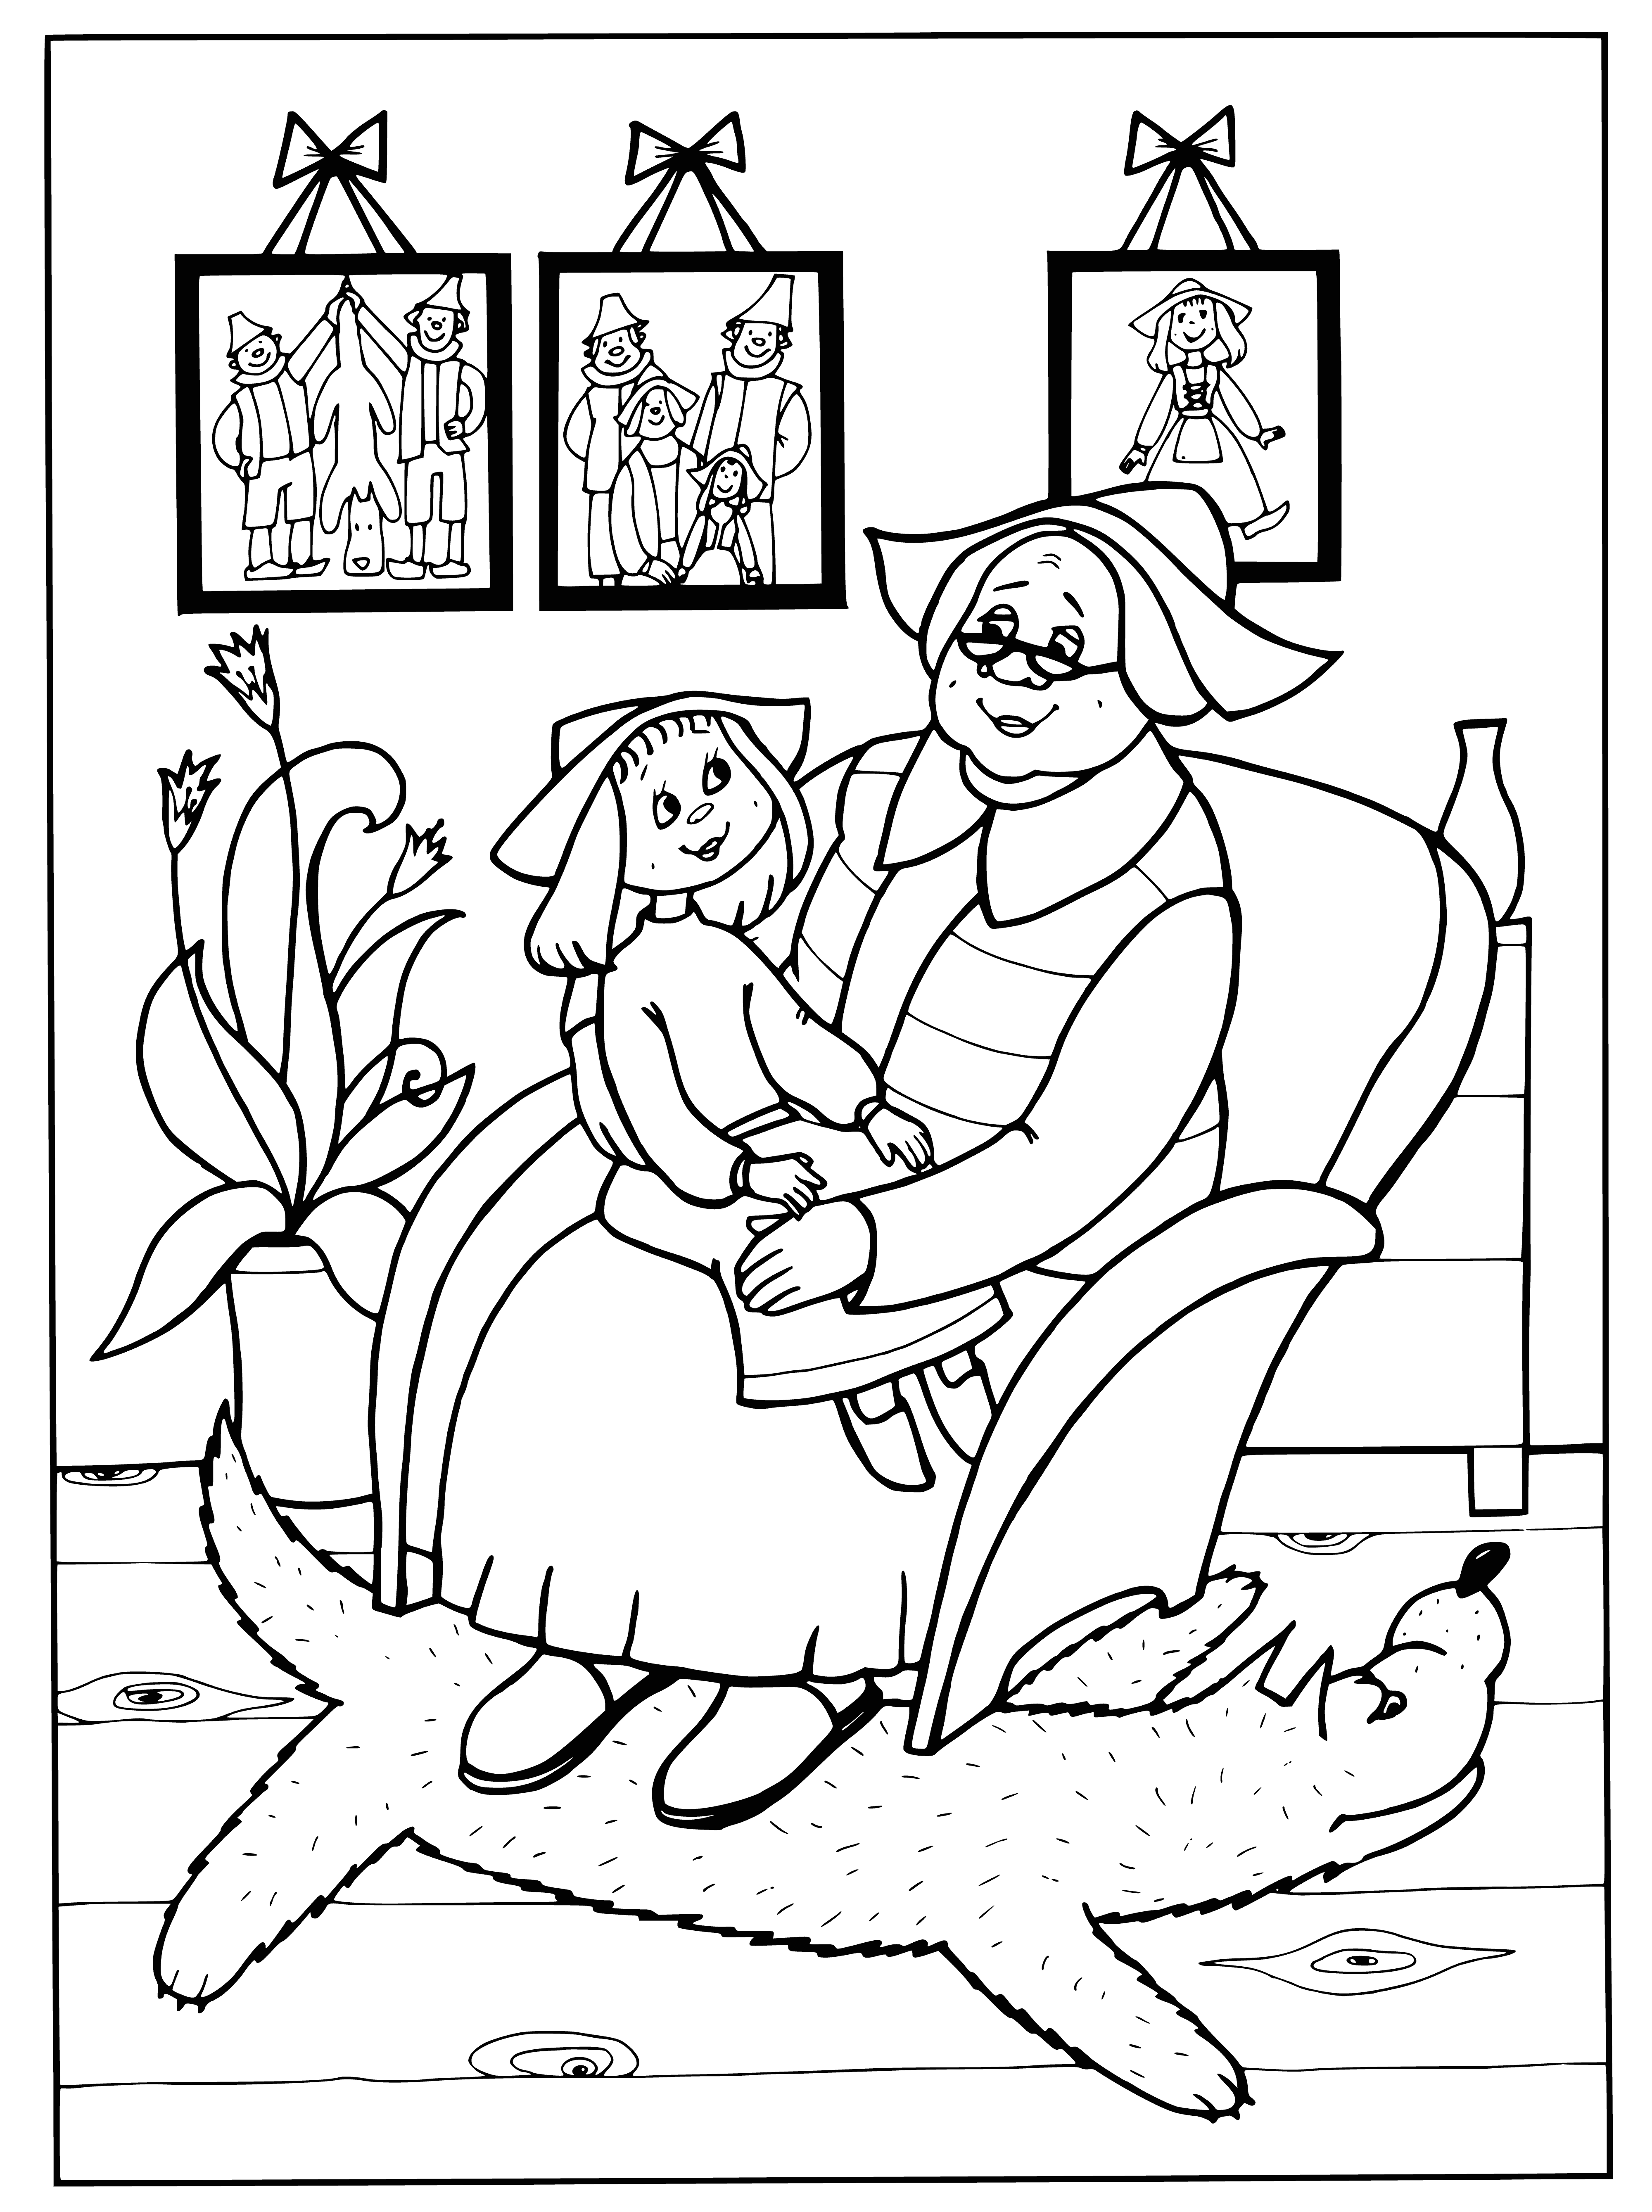 A happy ending coloring page